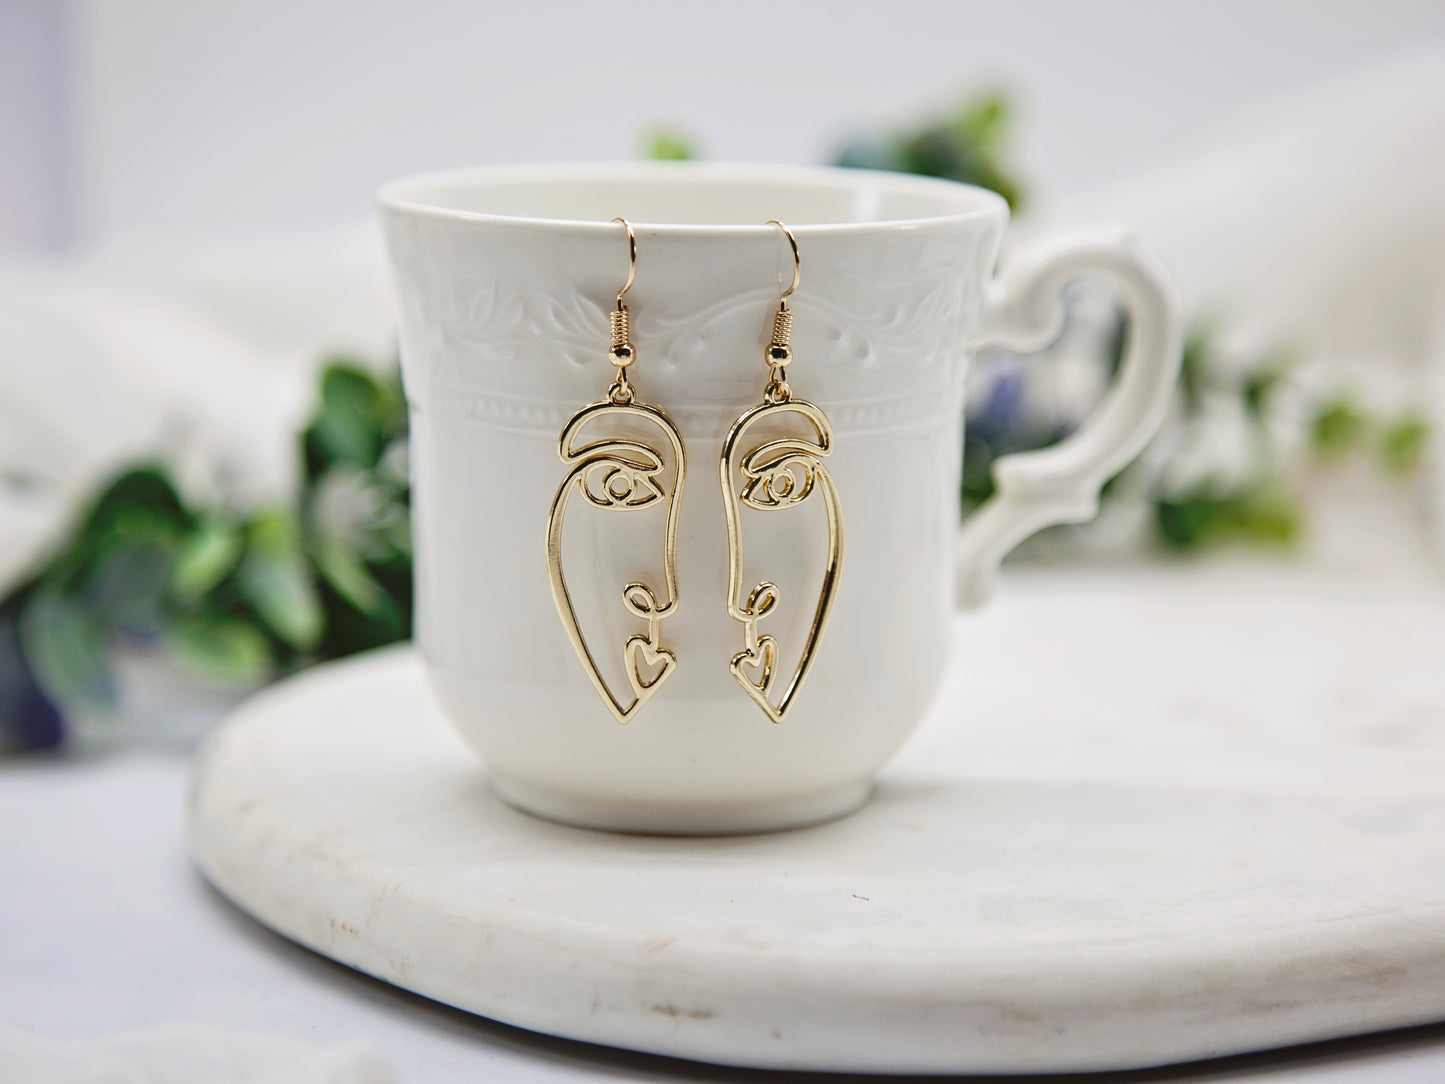 Abstract Gold Face Earrings